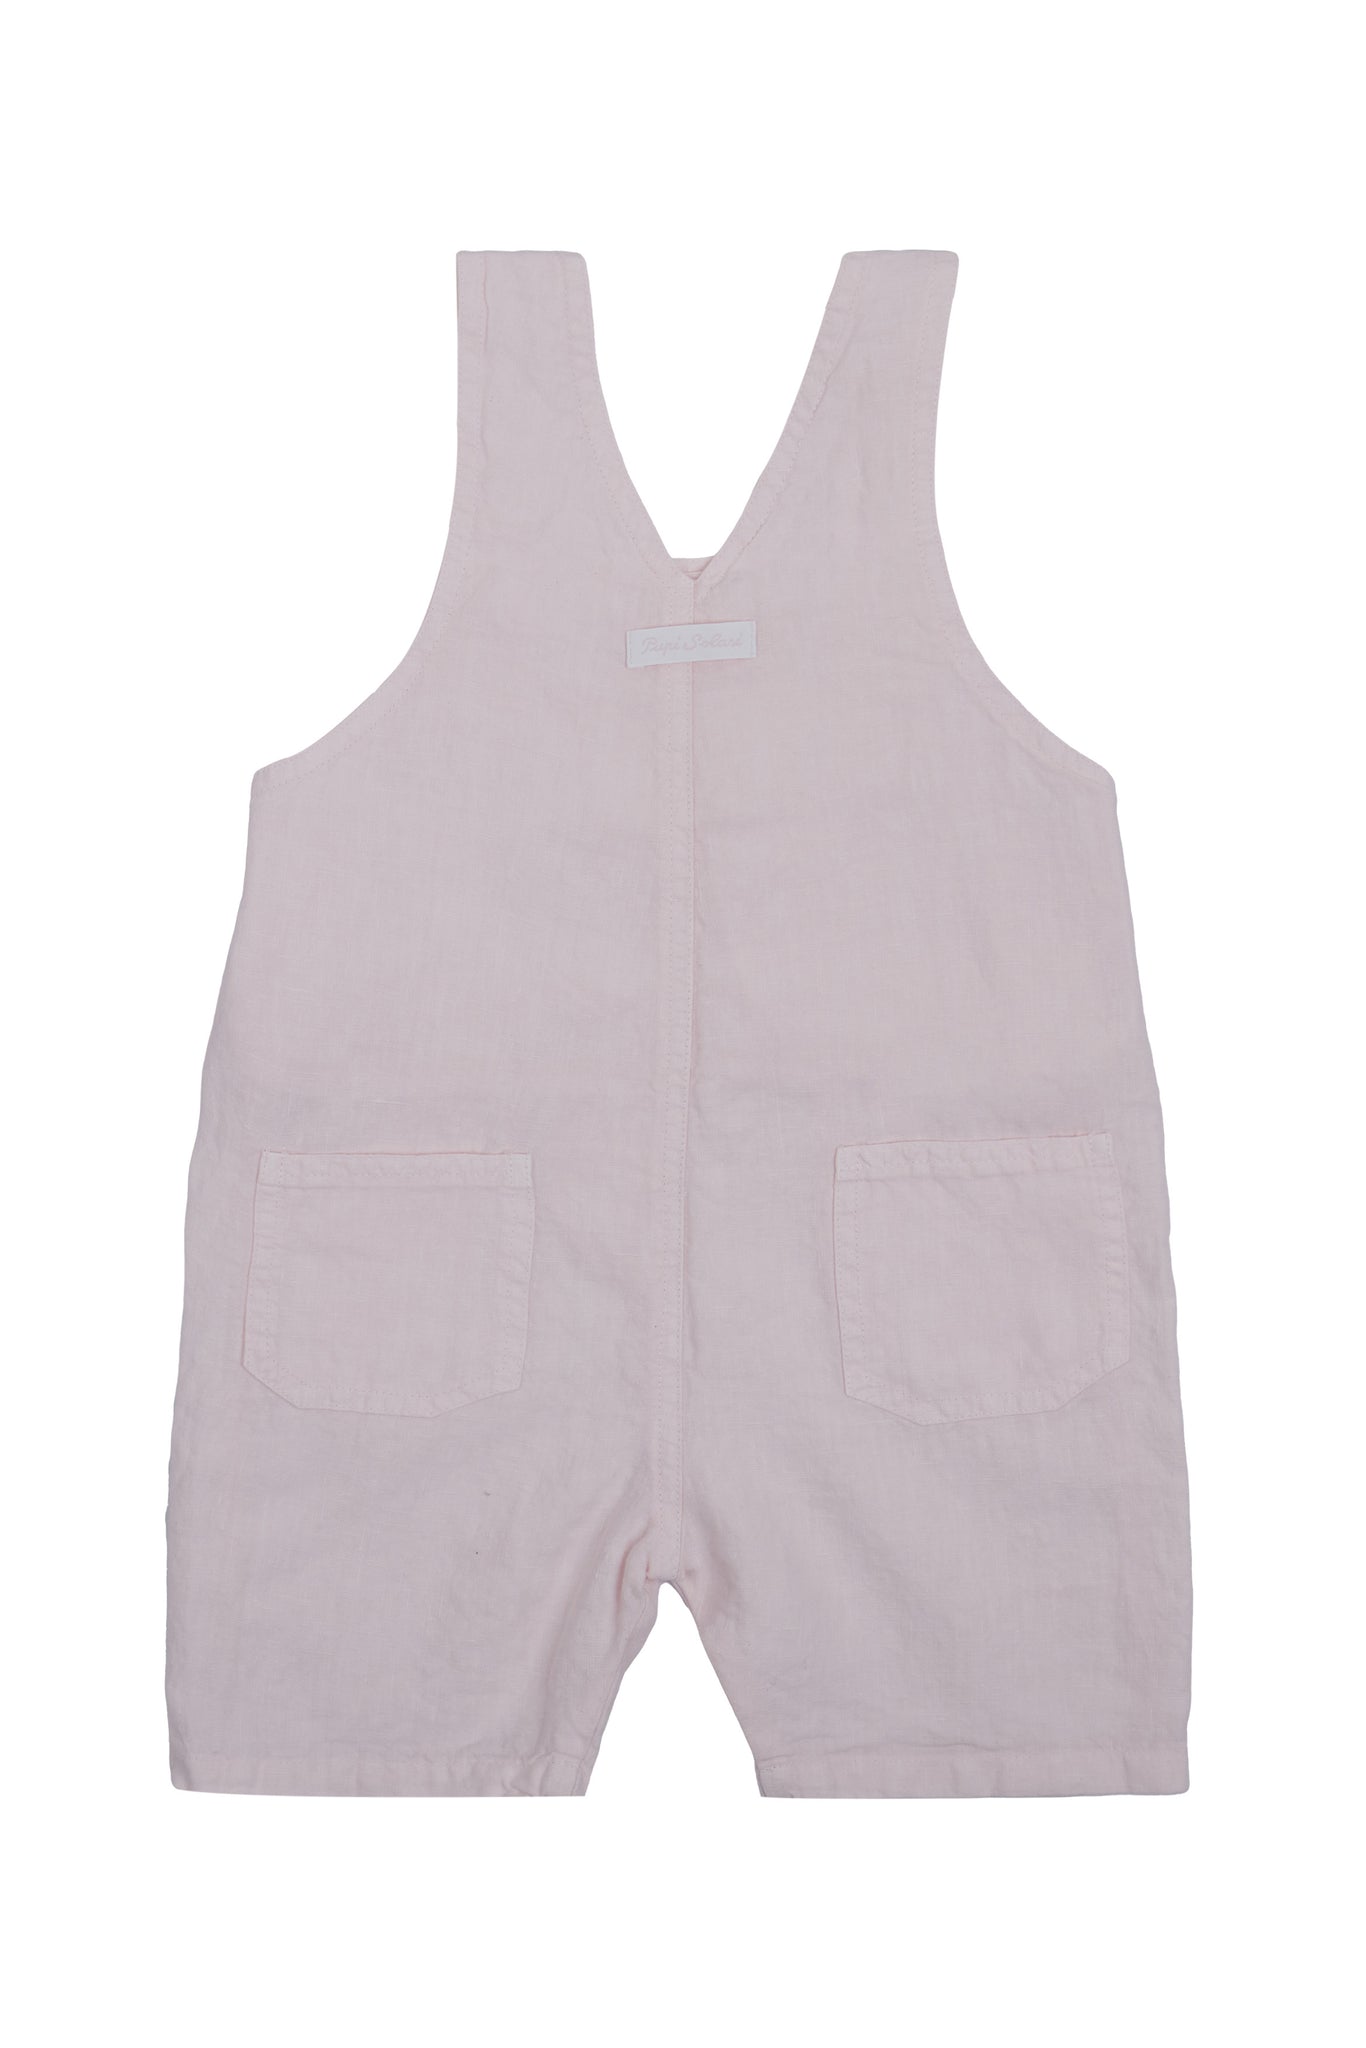 LINEN OVERALLS (yellow, white, beige, baby pink, strawberry, melon)